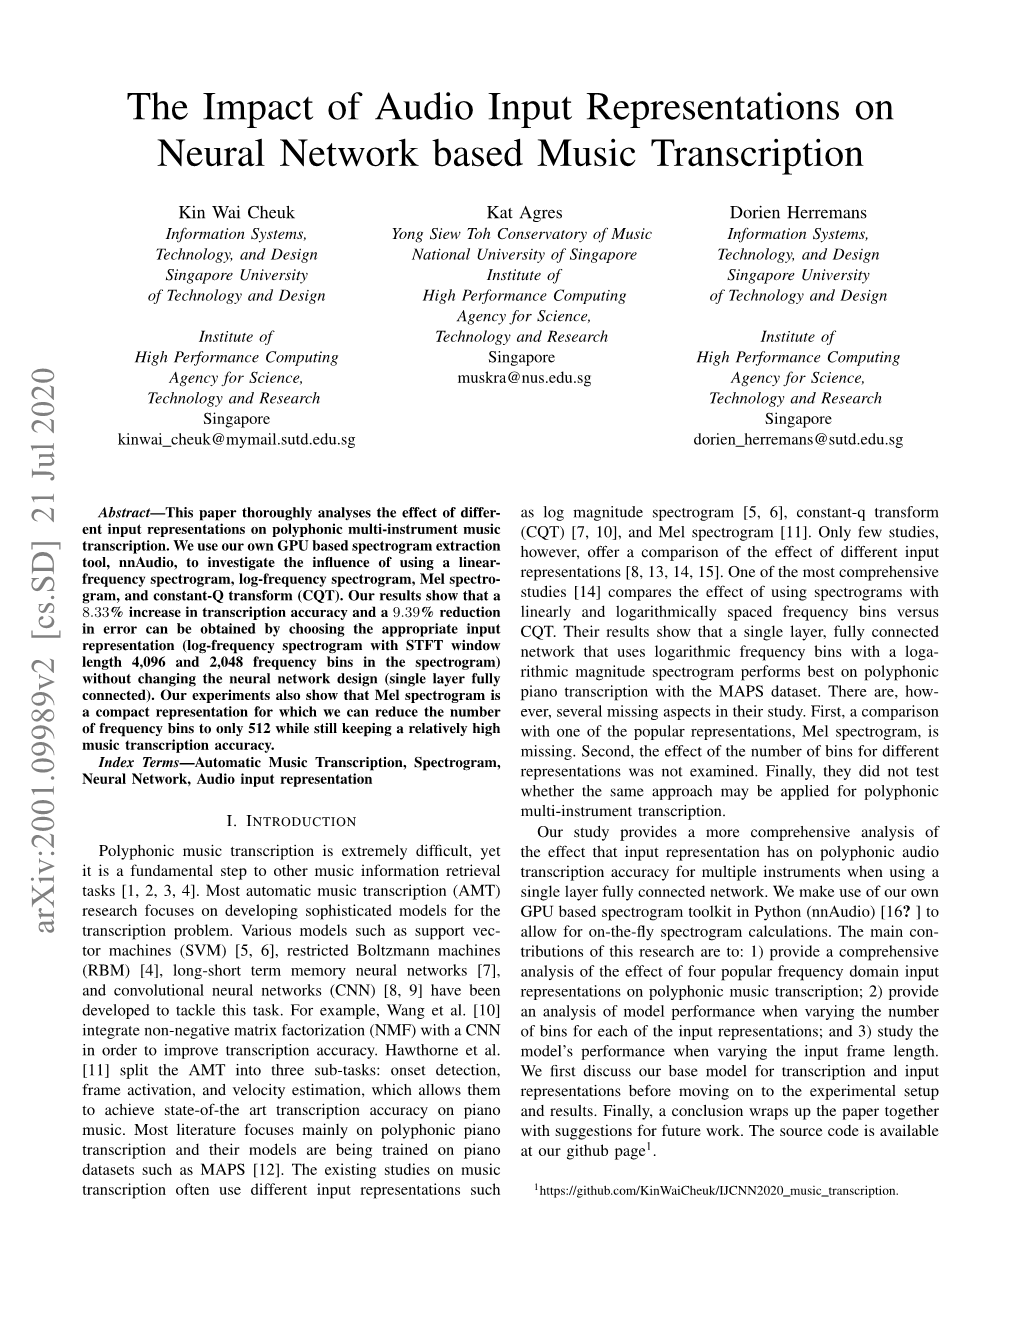 The Impact of Audio Input Representations on Neural Network Based Music Transcription